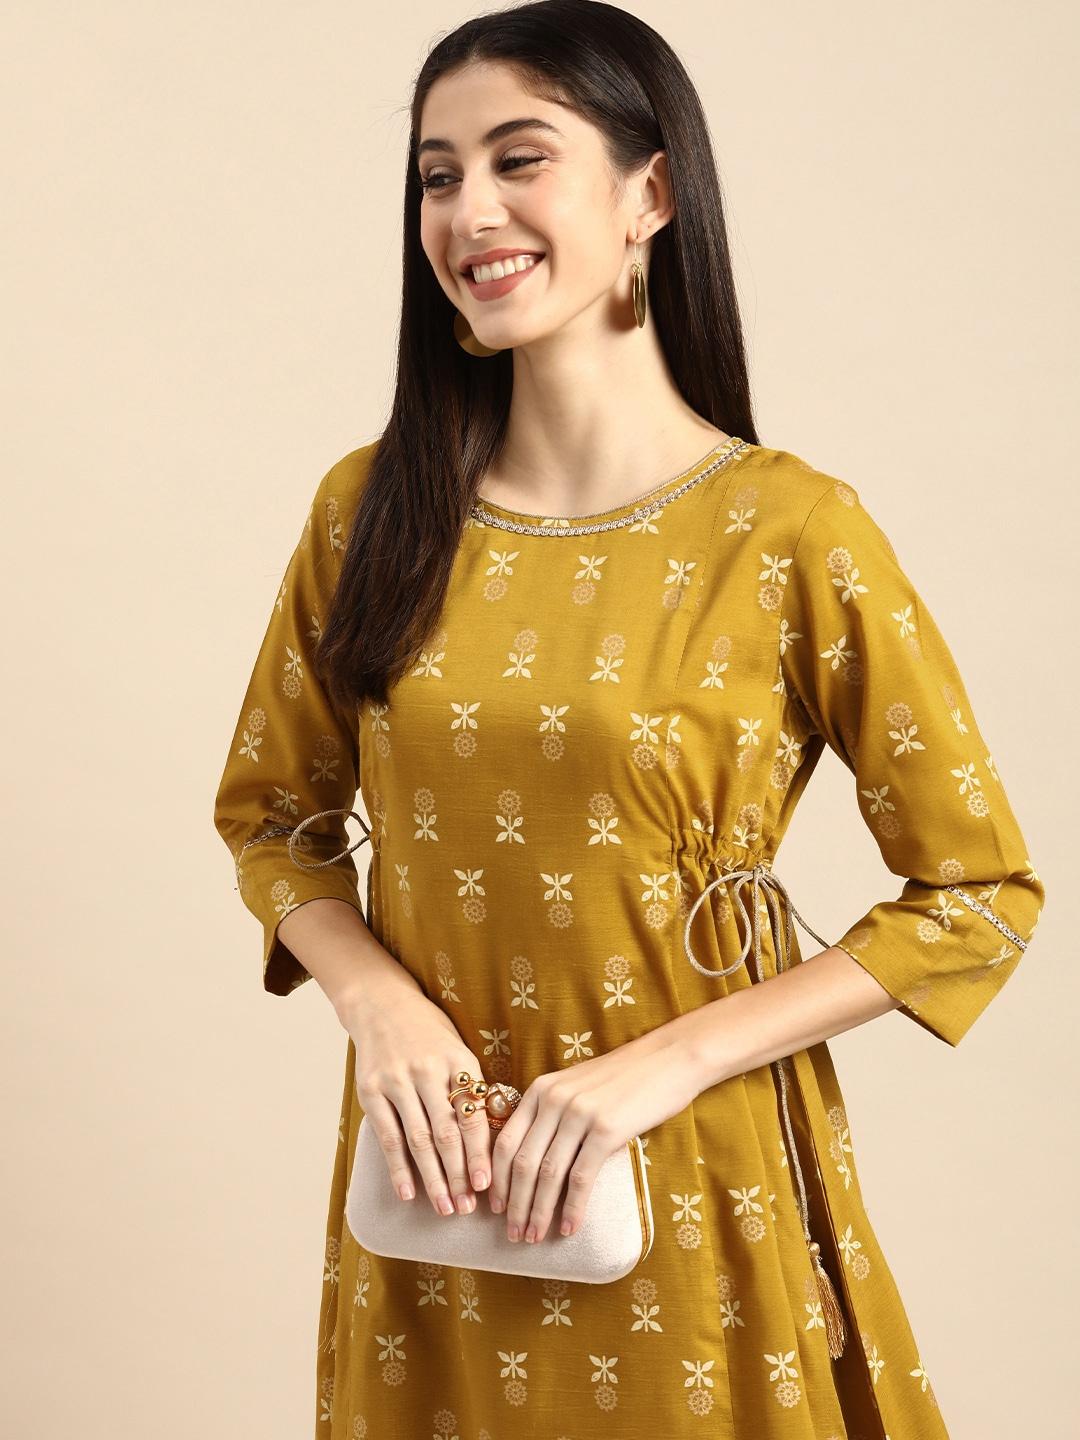 all about you mustard yellow ethnic motifs ethnic a-line midi dress